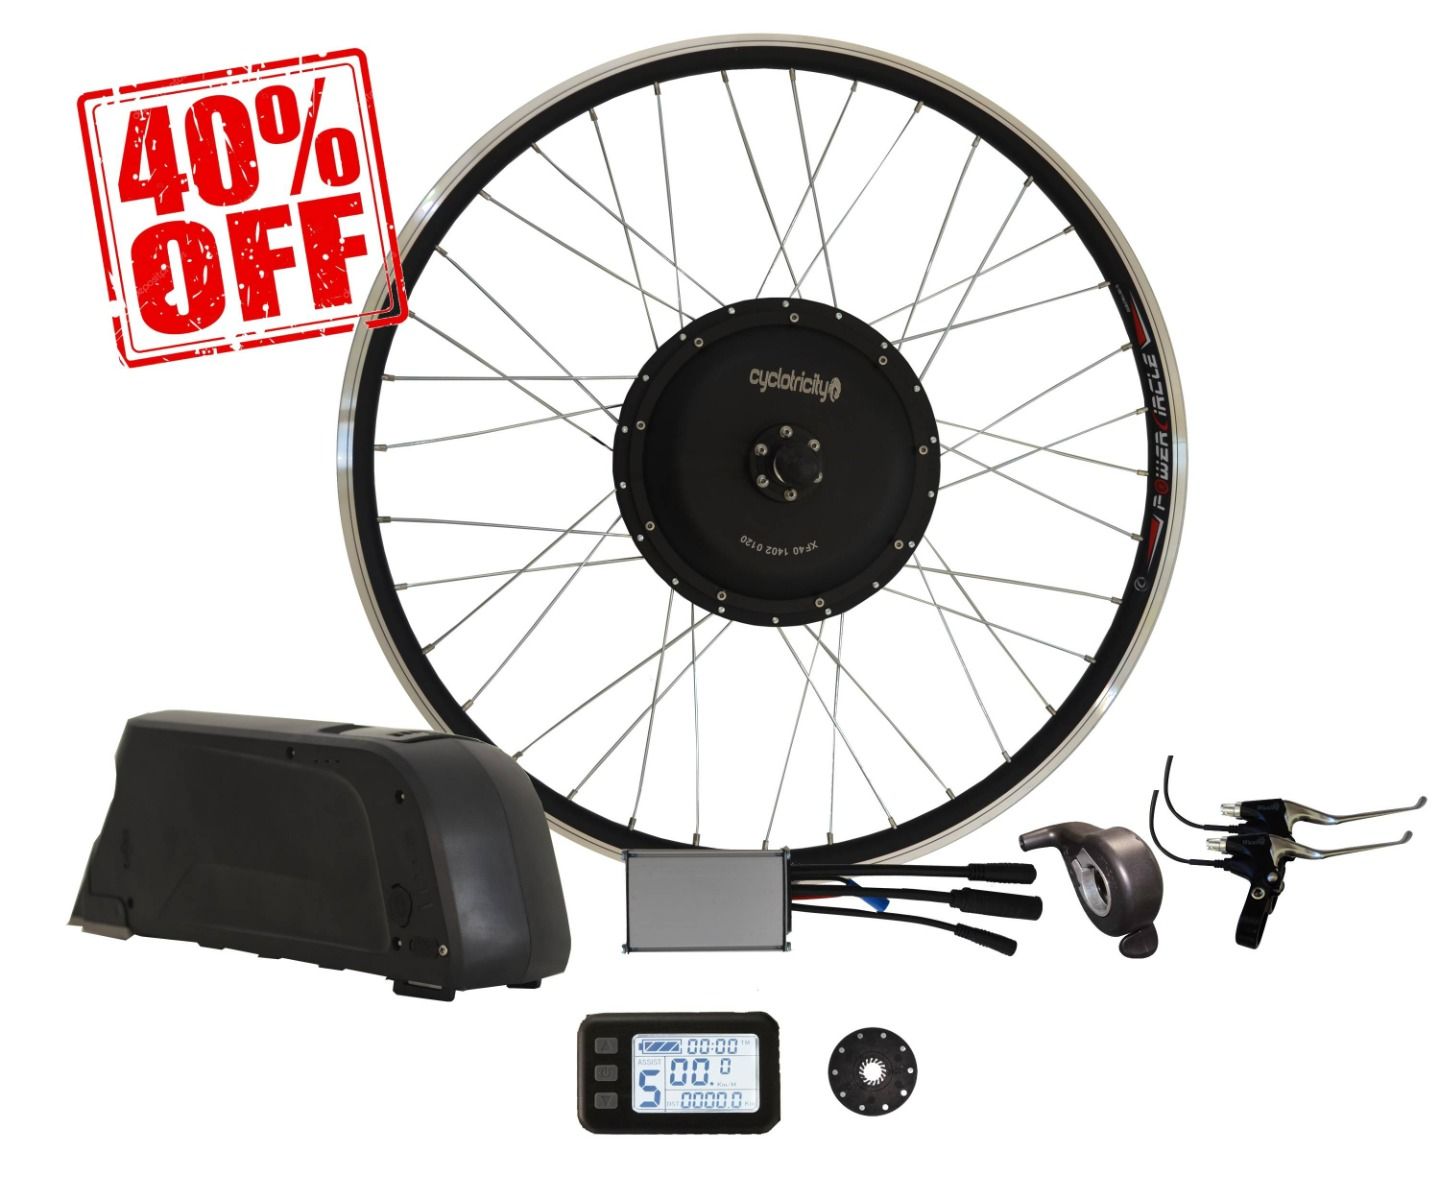 Limited-time offer: 40% off E-bike Conversion Kit | Cyclotricity